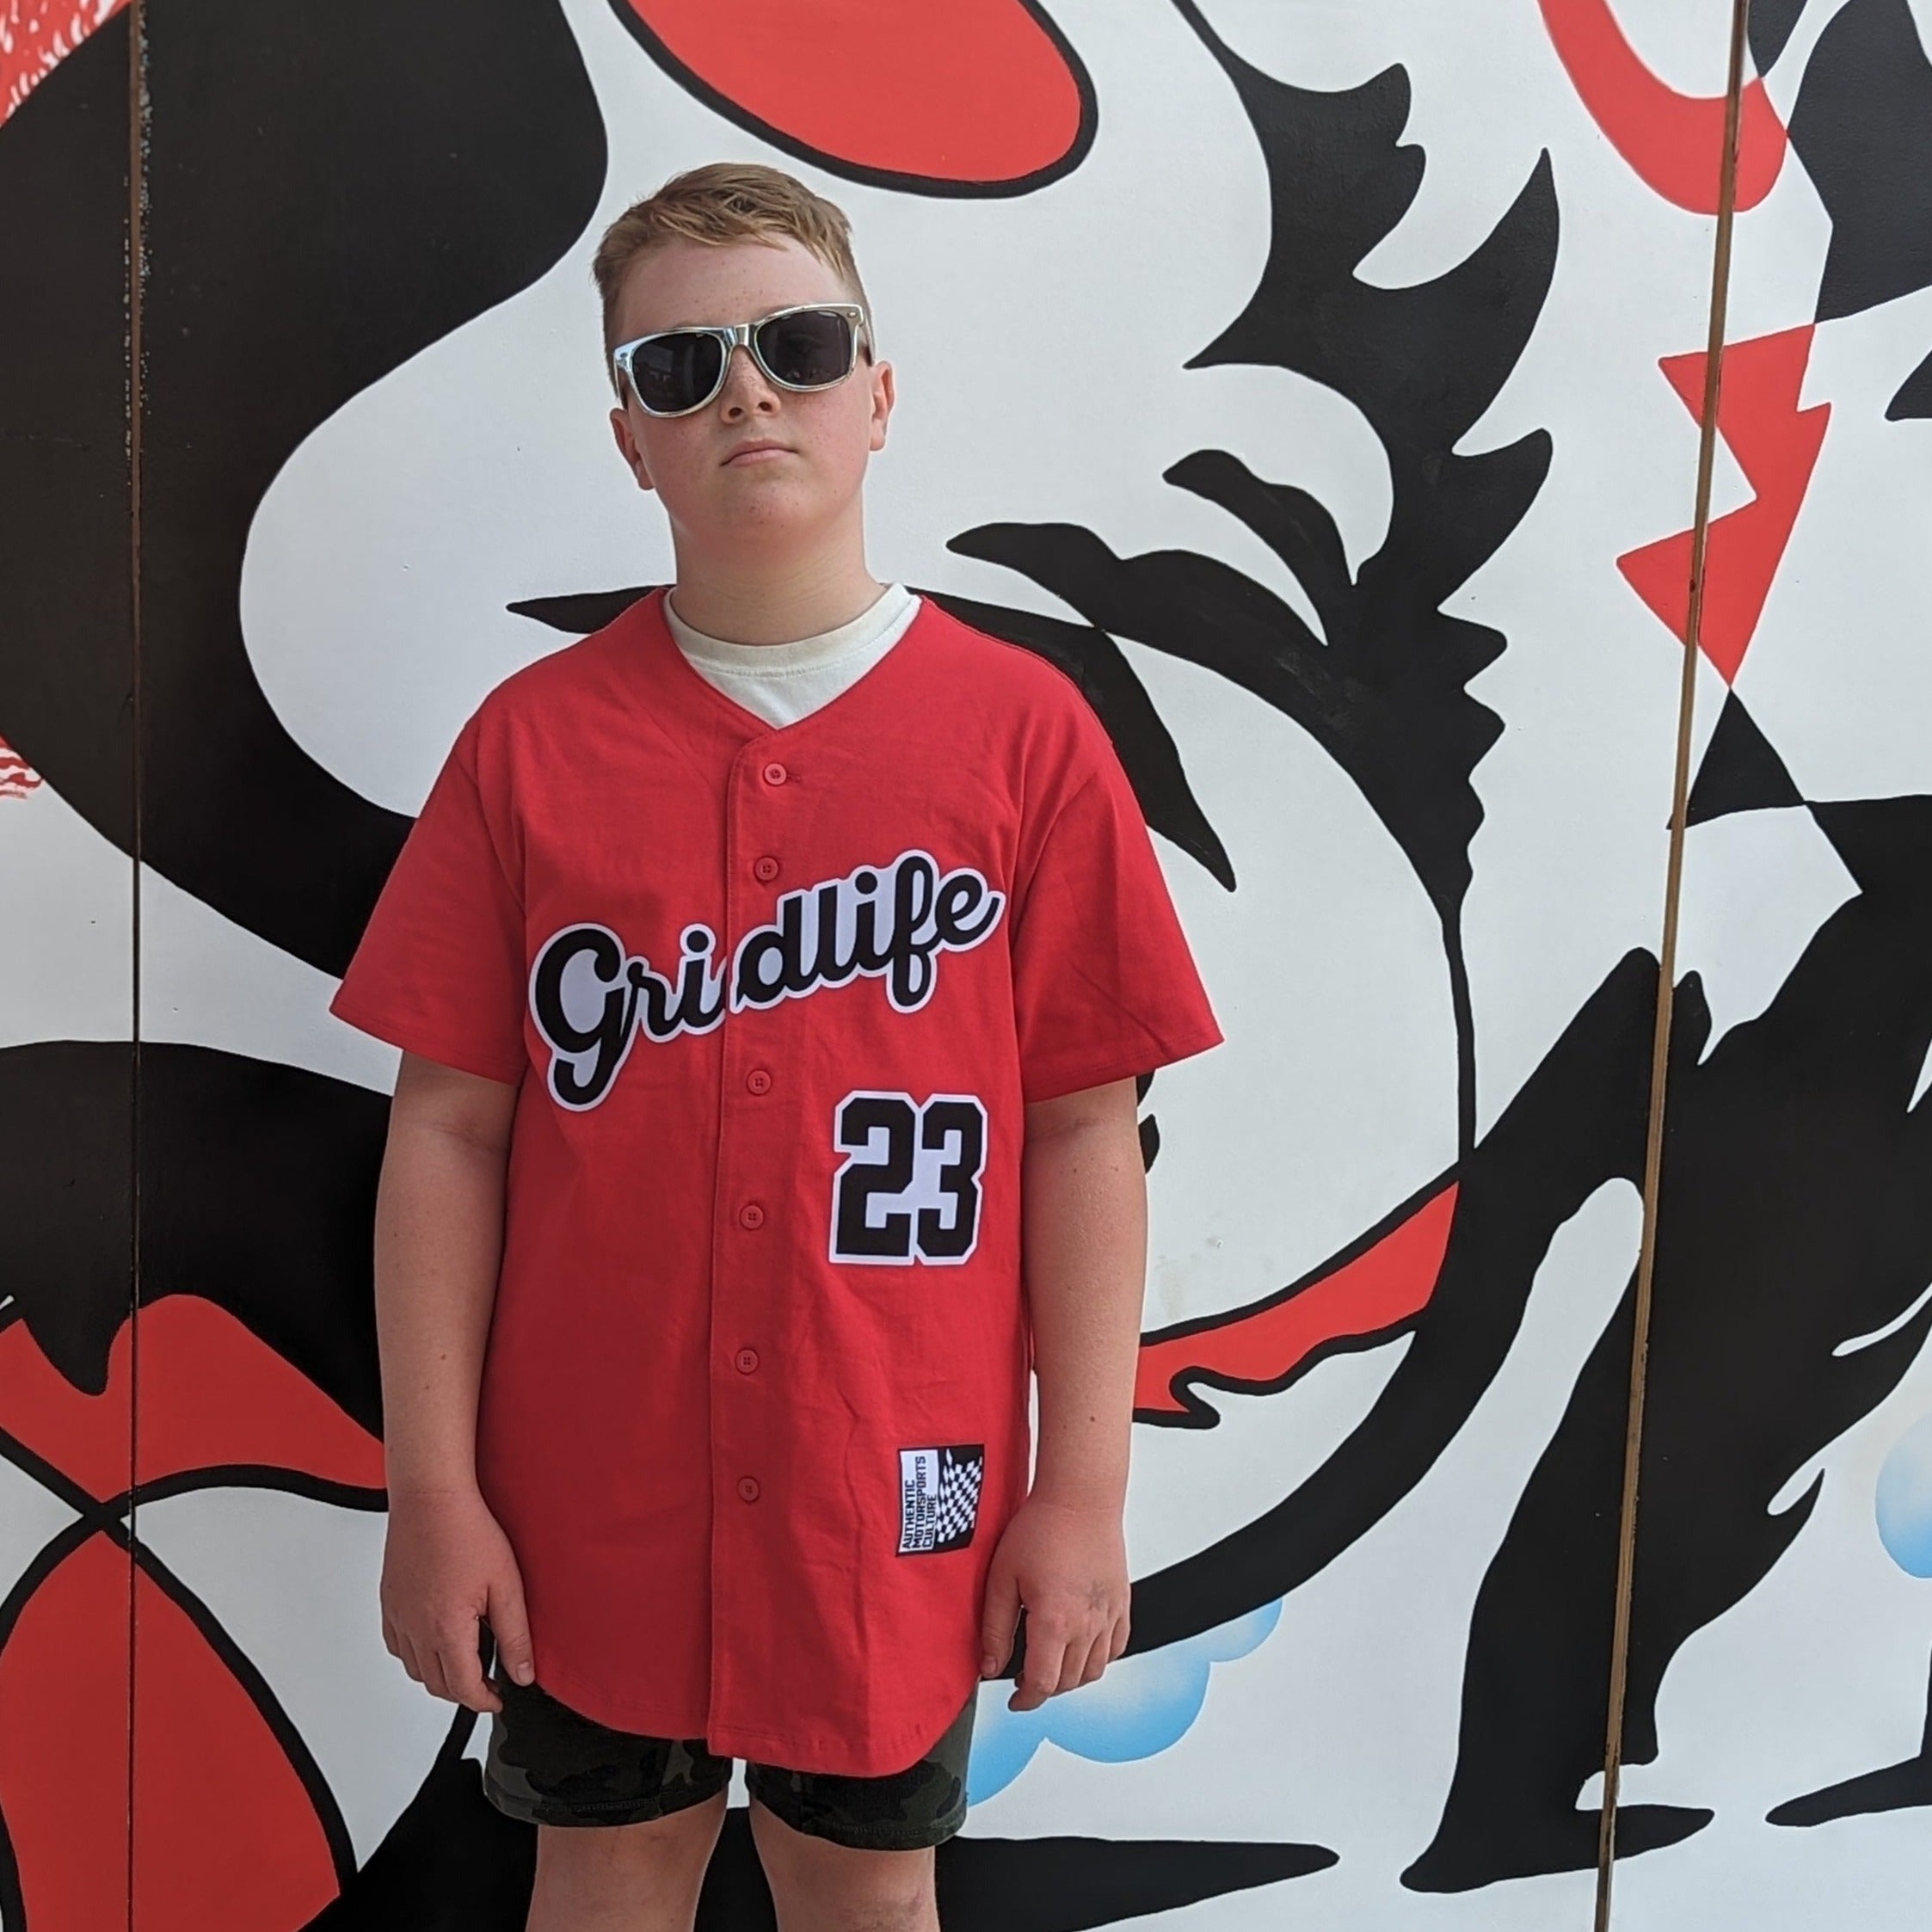 Very cool kid wearing GRIDLIFE 23 legends jersey 